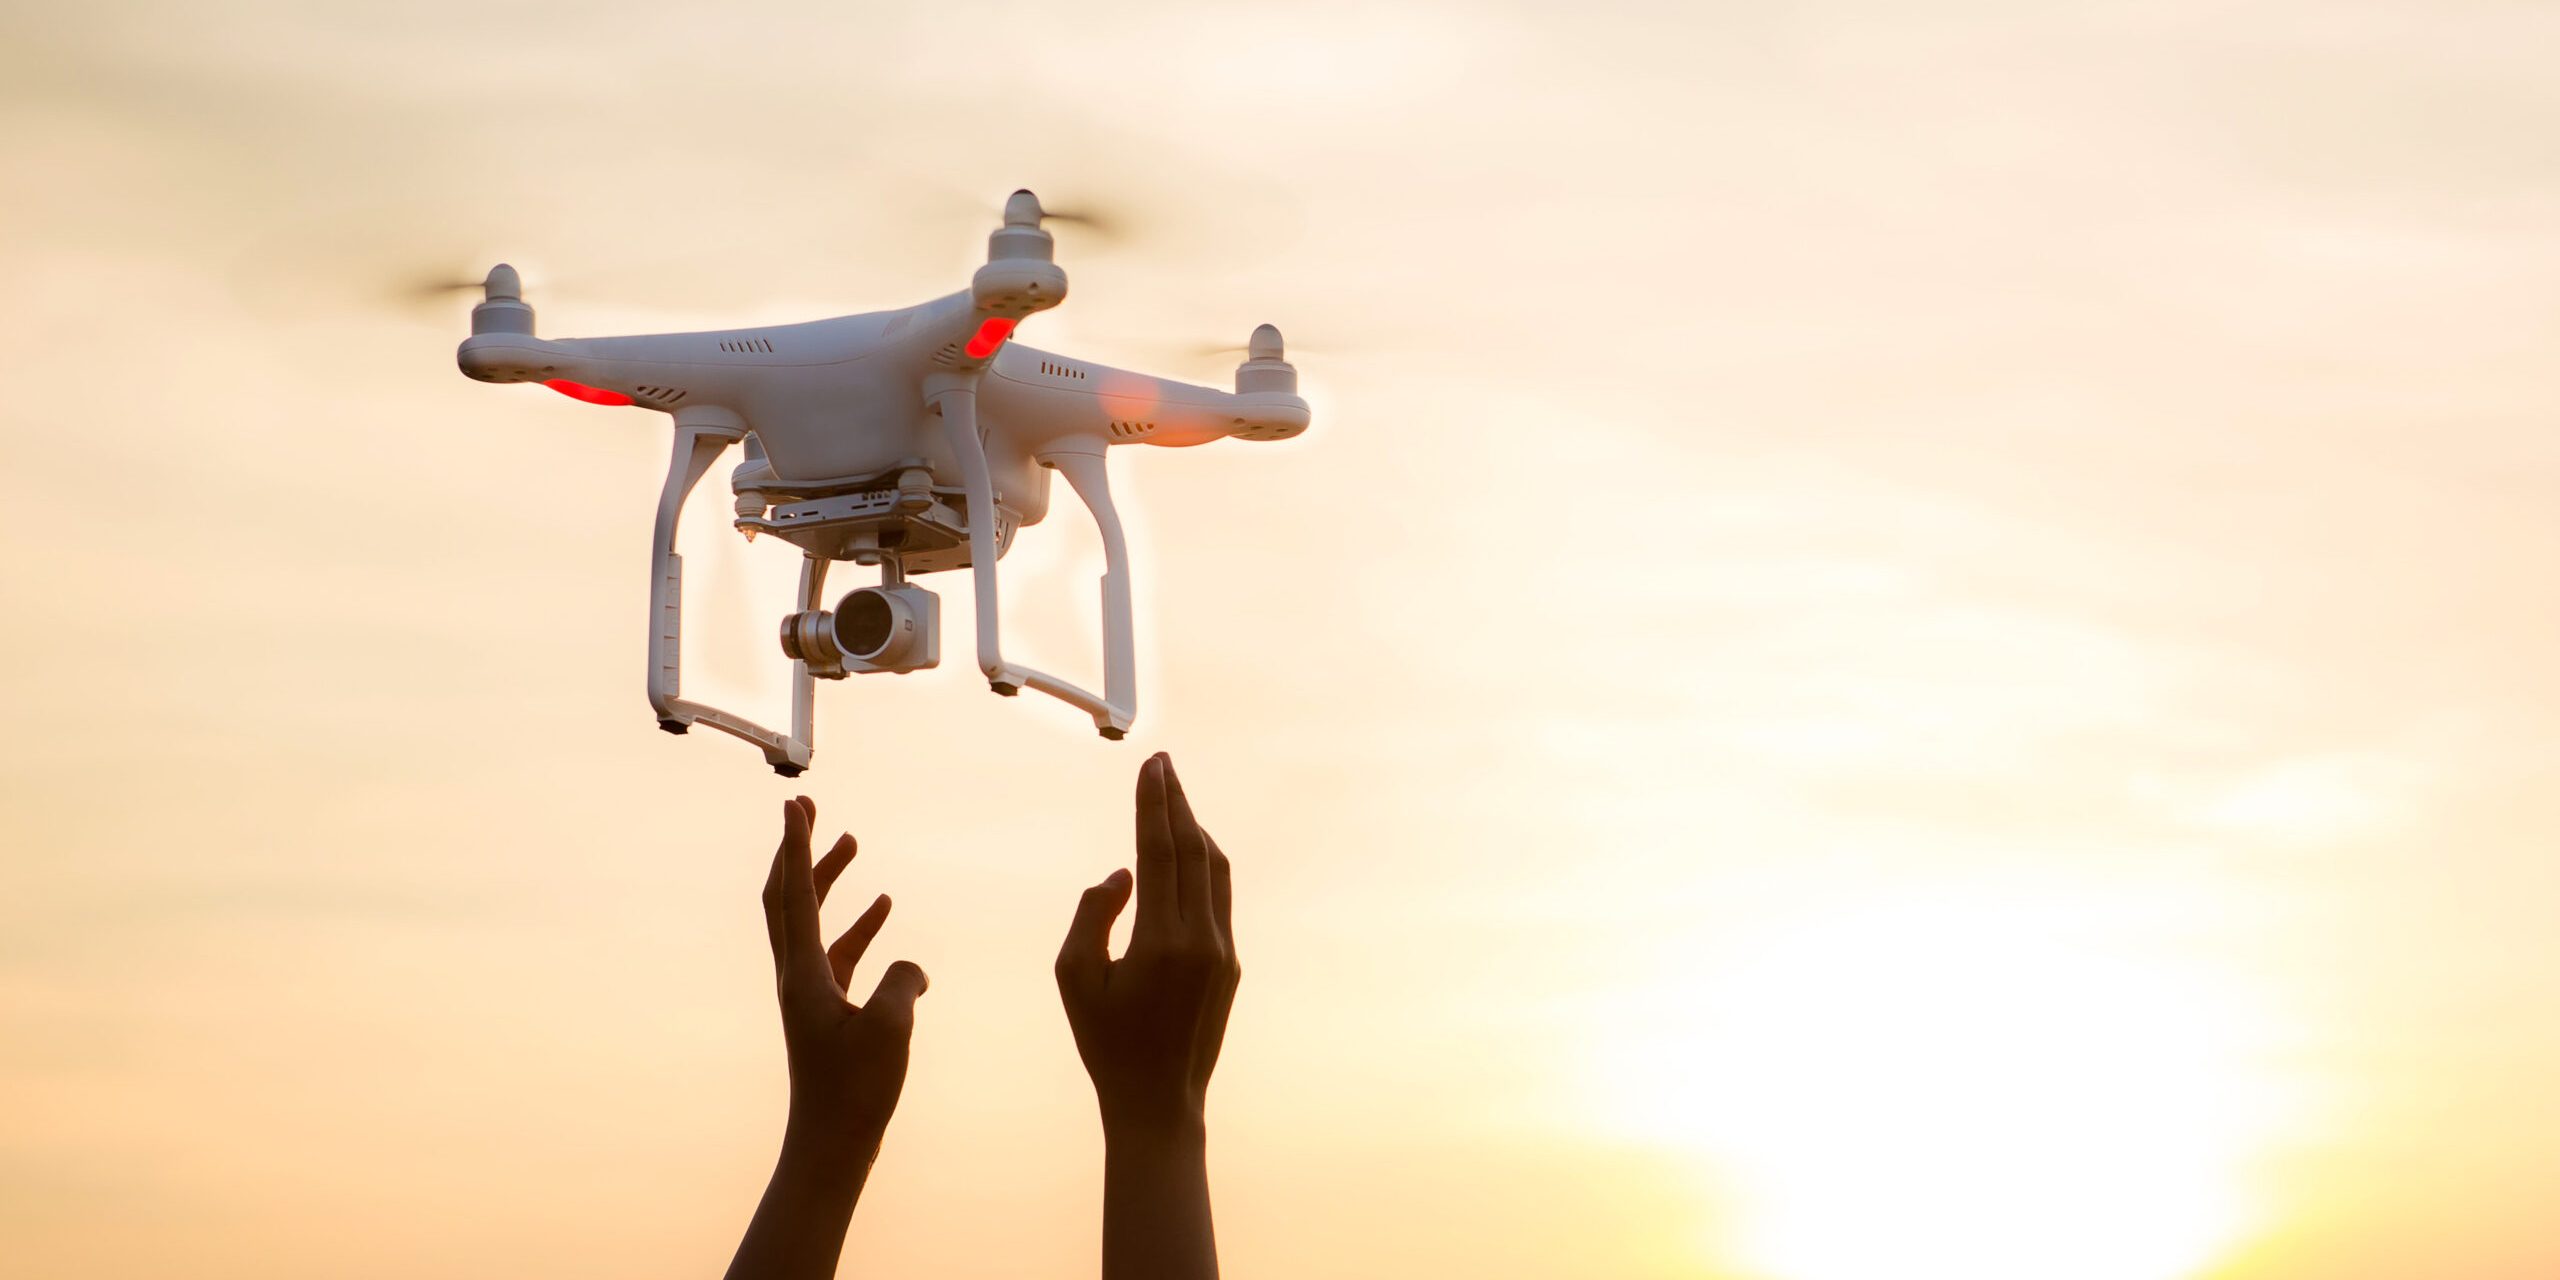 Drones are evolving the aviation ecosystem